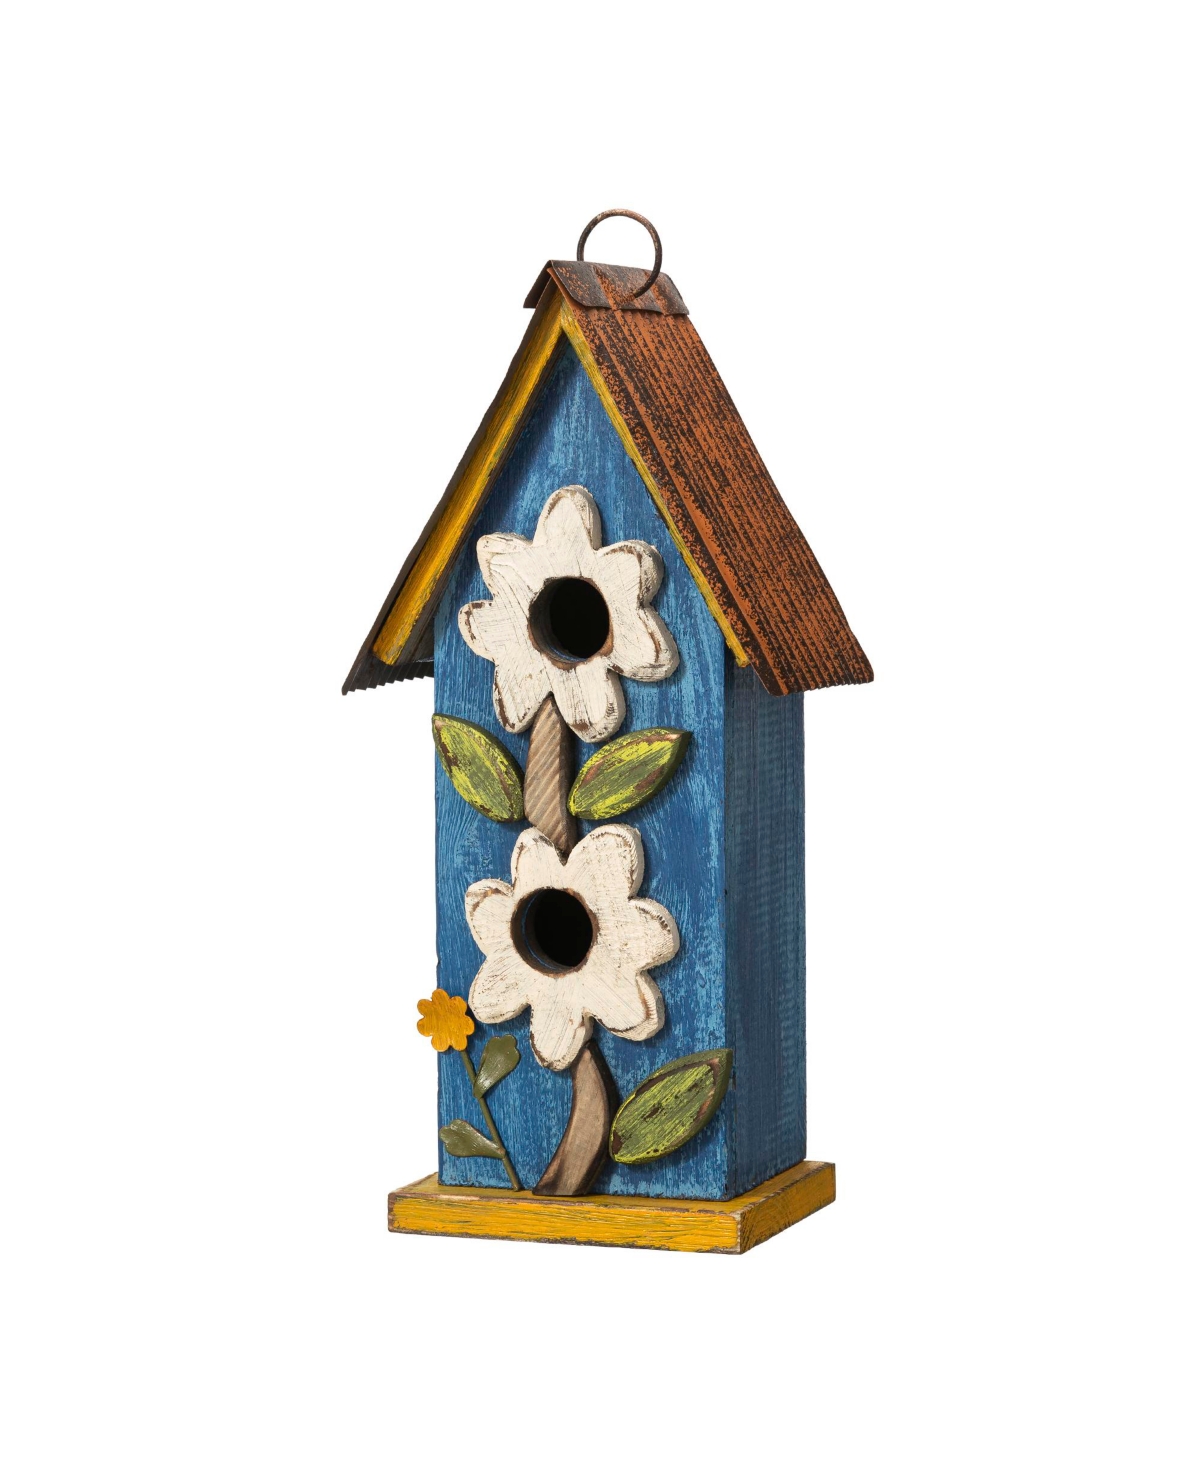 13.75" H Washed Two-Tiered Distressed Solid Wood Birdhouse with 3D Flowers - Blue